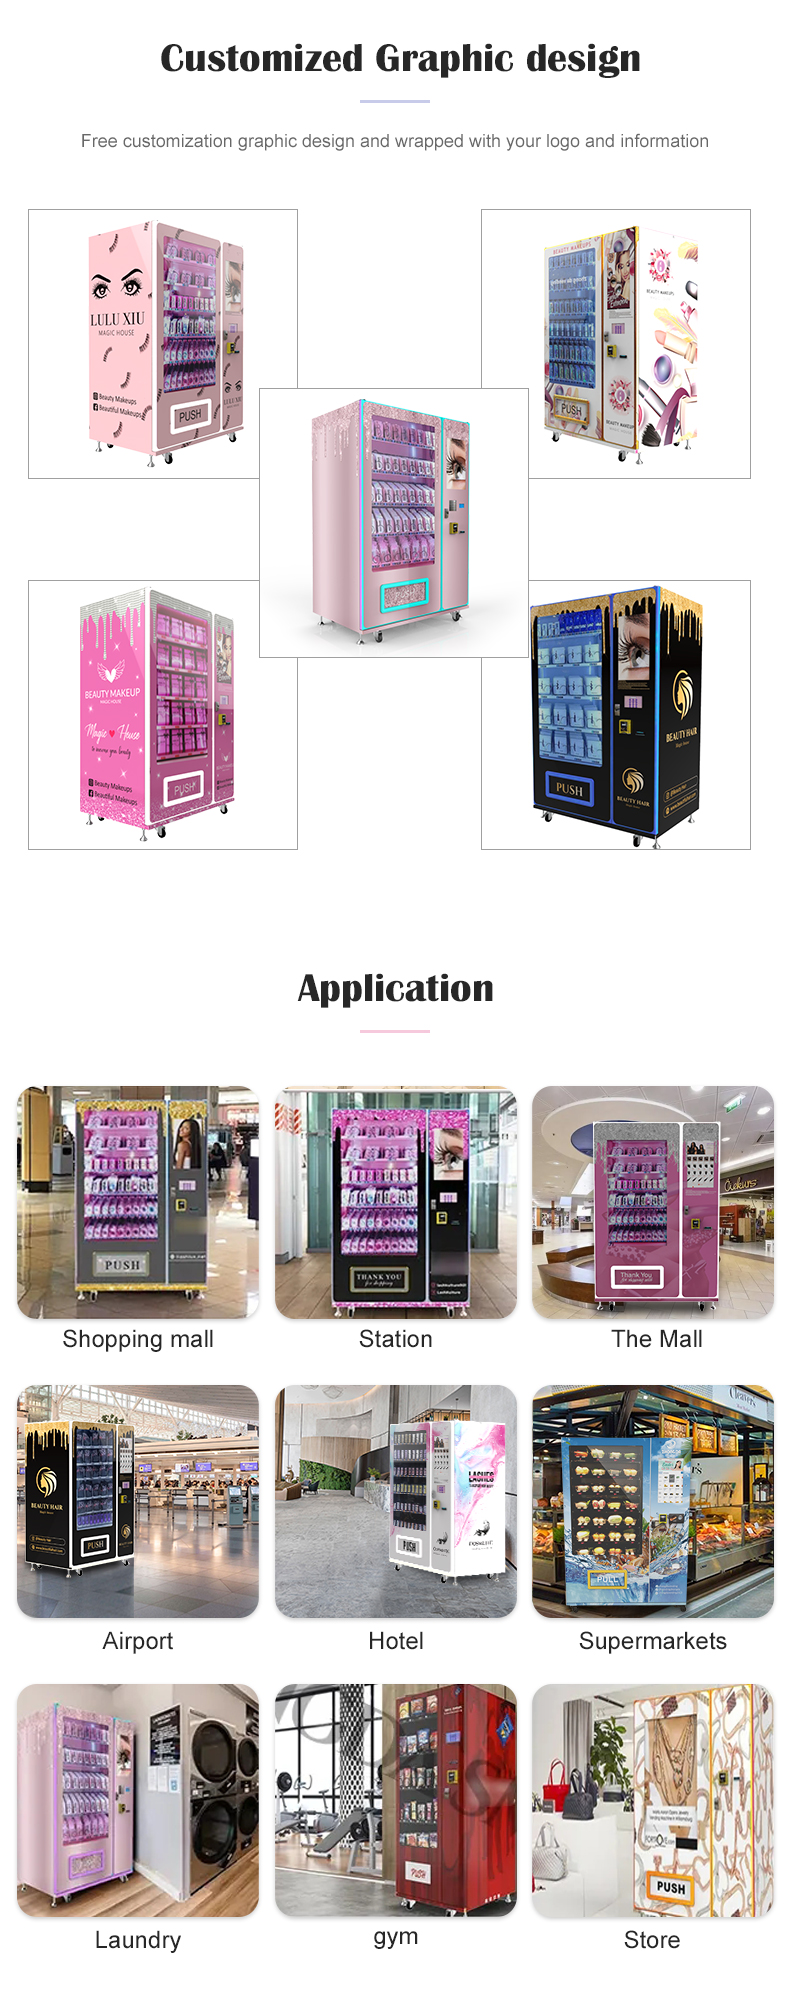 with touch screen vending machine for foods and drinks